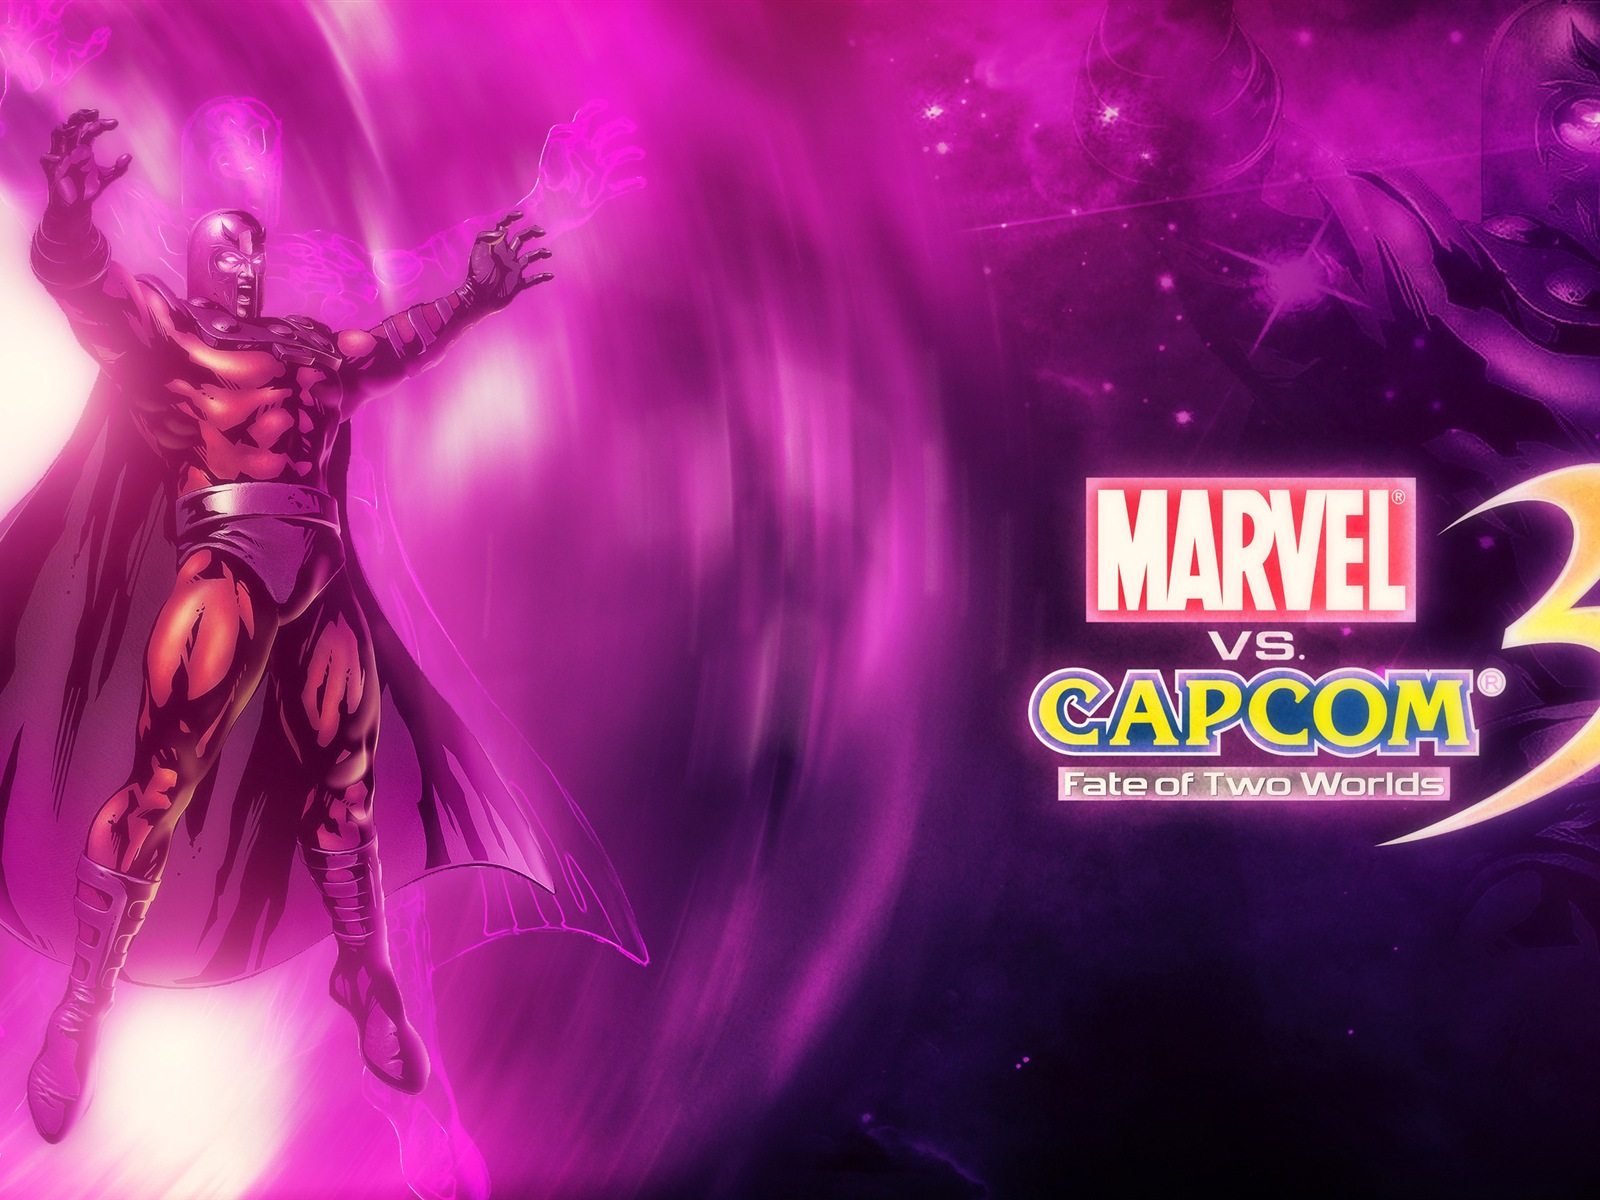 Marvel VS. Capcom 3: Fate of Two Worlds HD game wallpapers #7 - 1600x1200